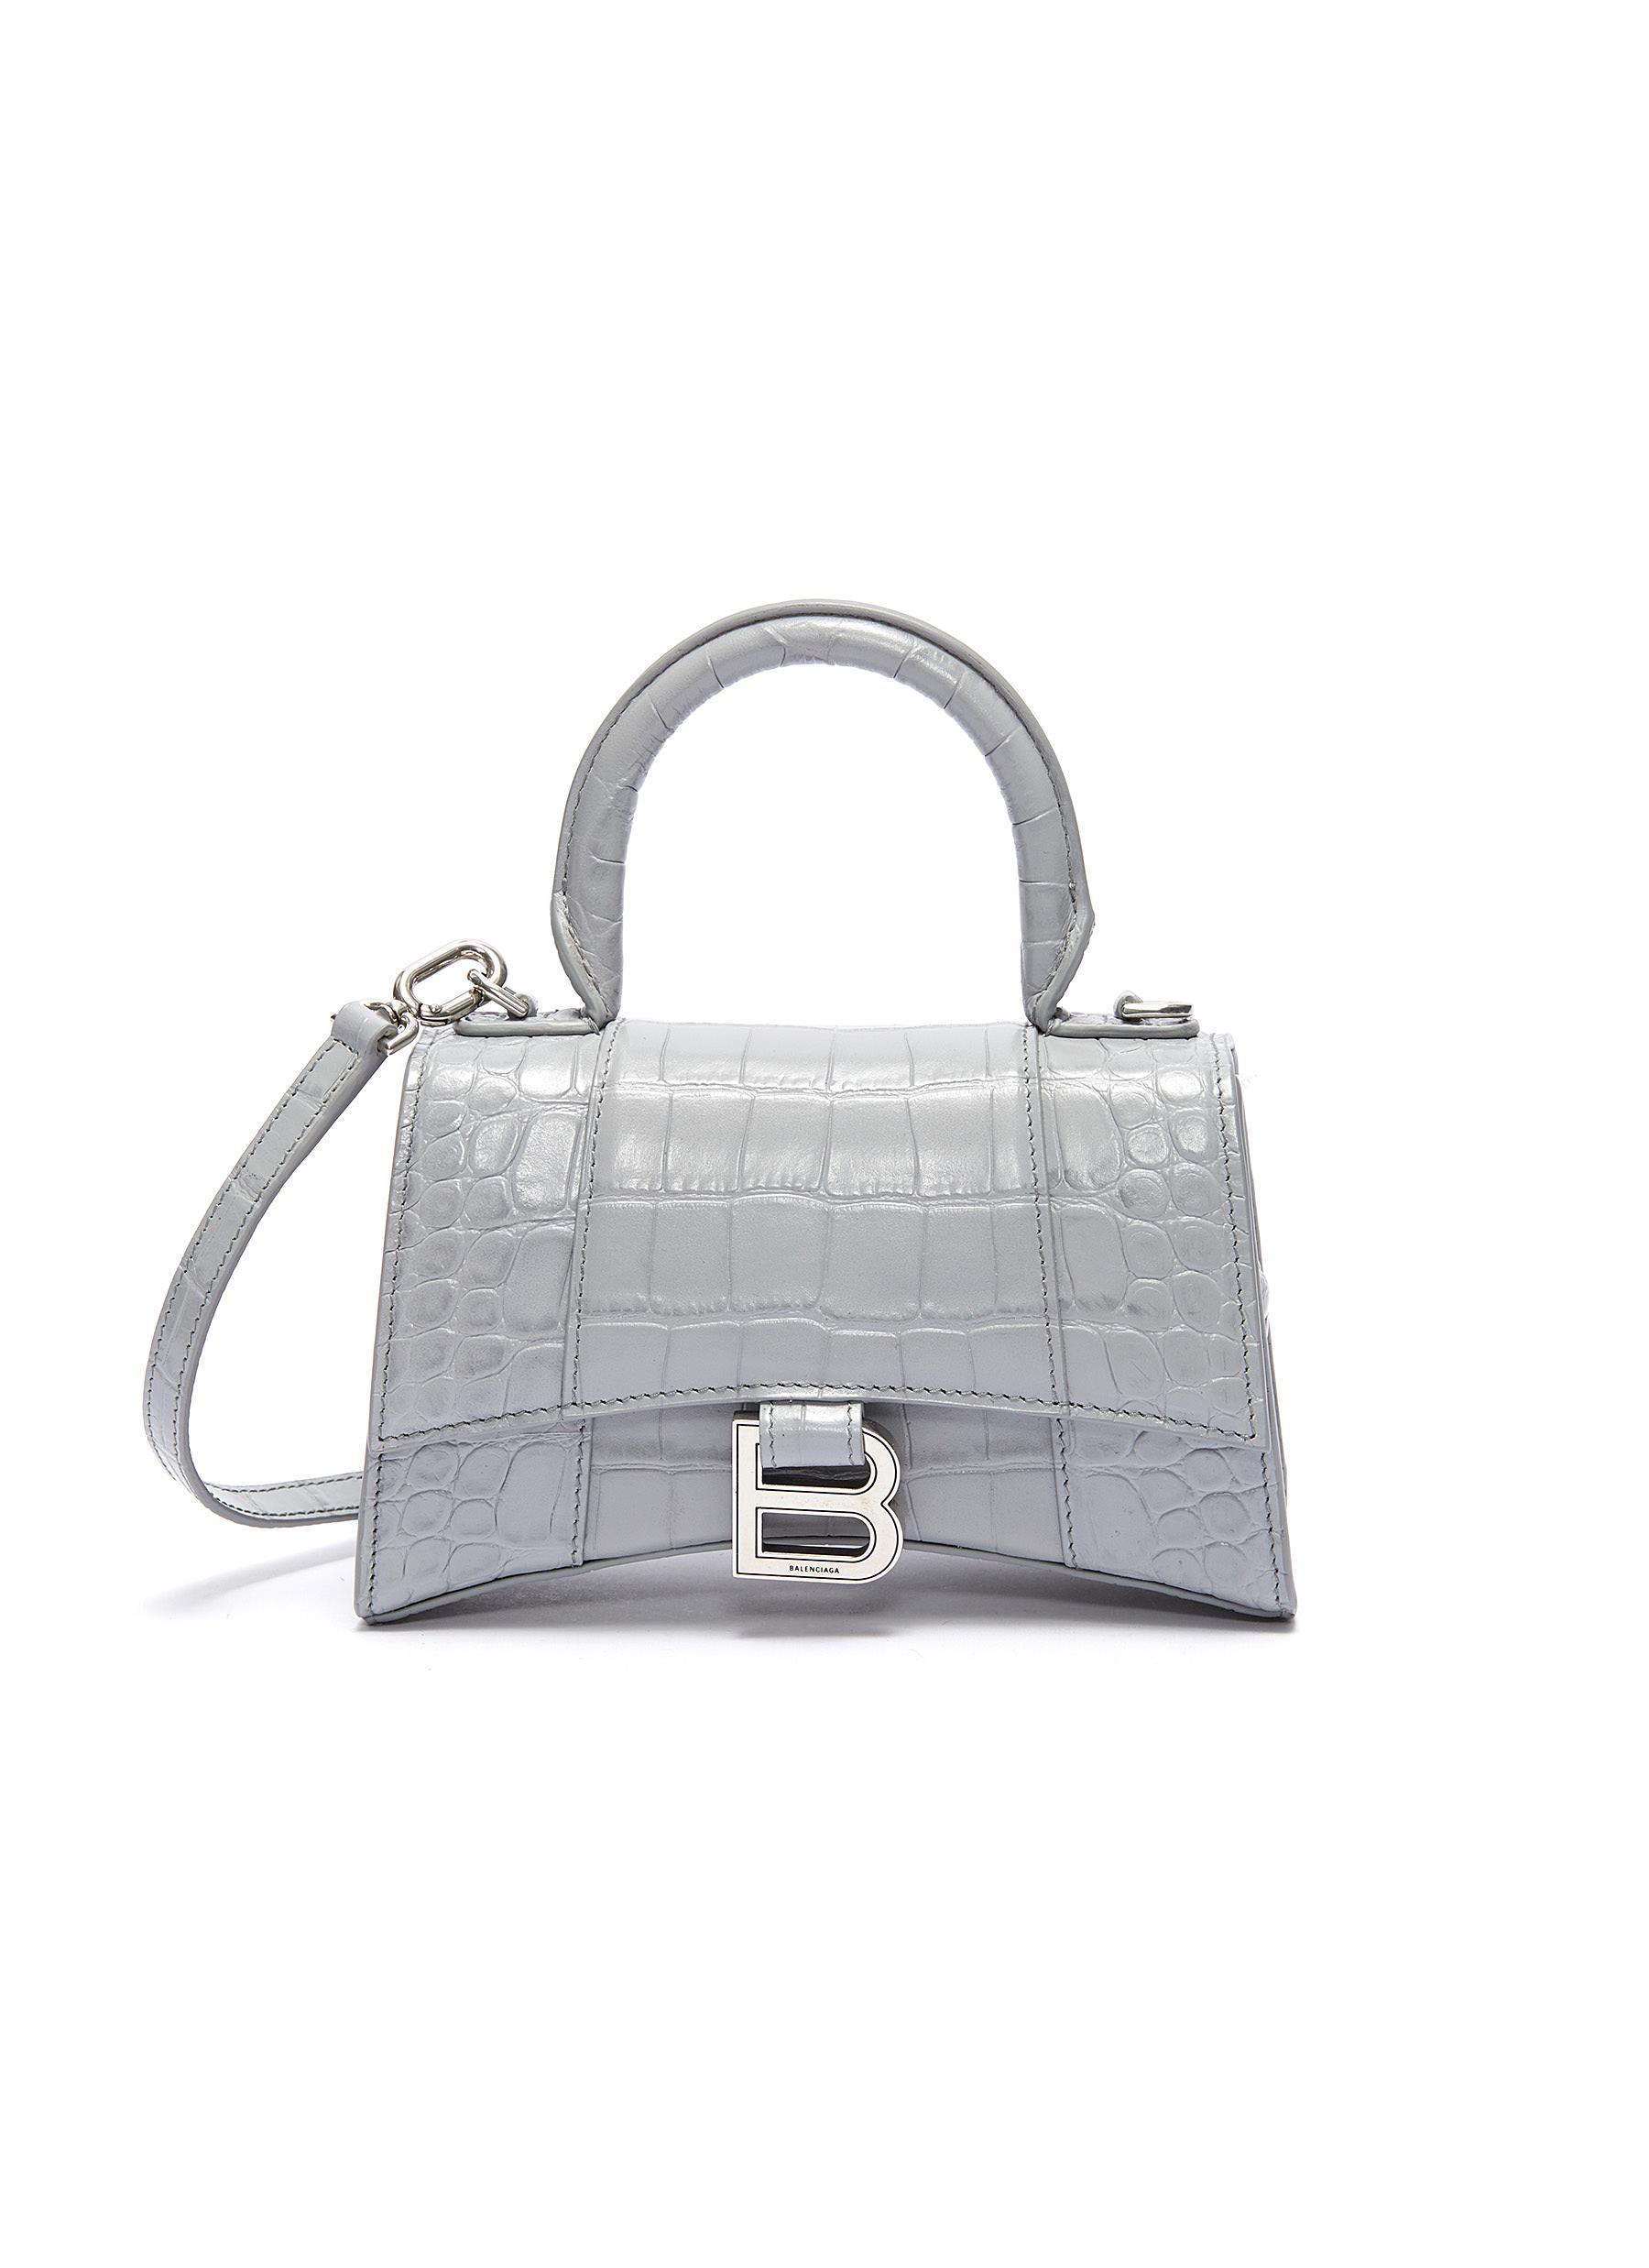 Balenciaga 'hourglass' Xs Top Handle Croc Embossed Leather Bag in Grey  Croc-Embossed (Gray) | Lyst